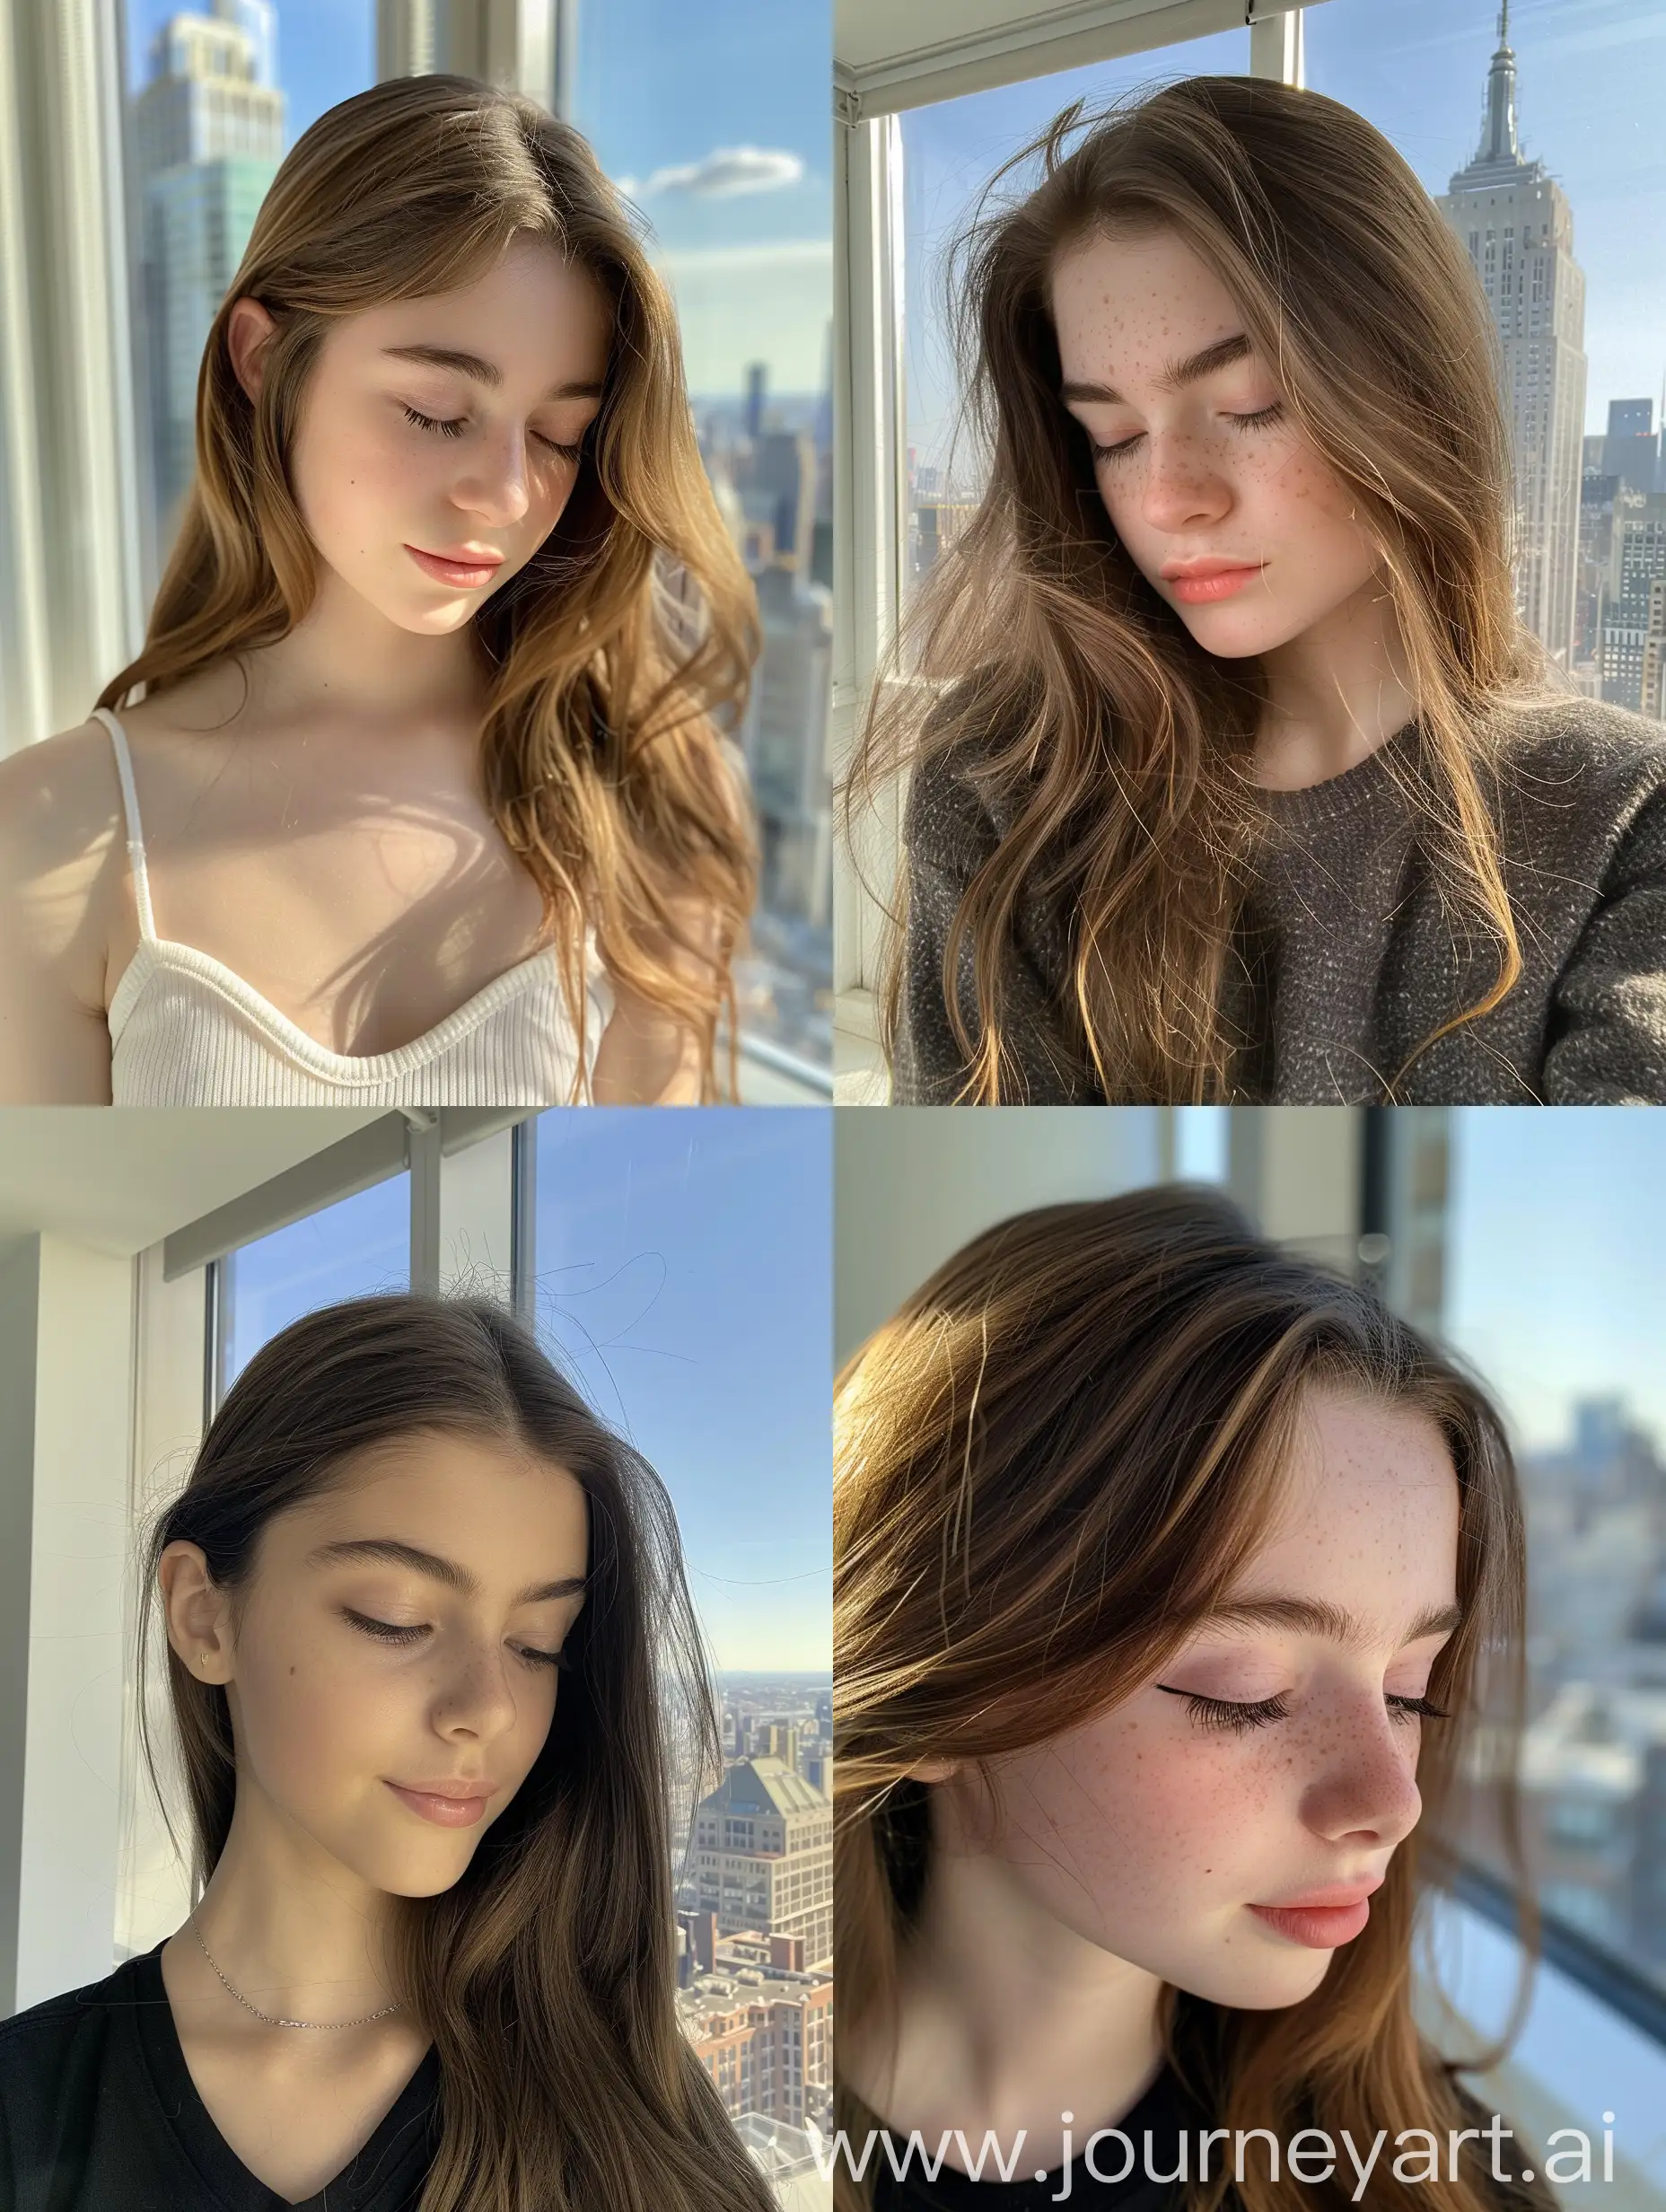 Aesthetic instagram selfie of a teenage girl influencer, 16 years old, looking down, super model face, chiseled cheekbones, in NYC penthouse, slight smile